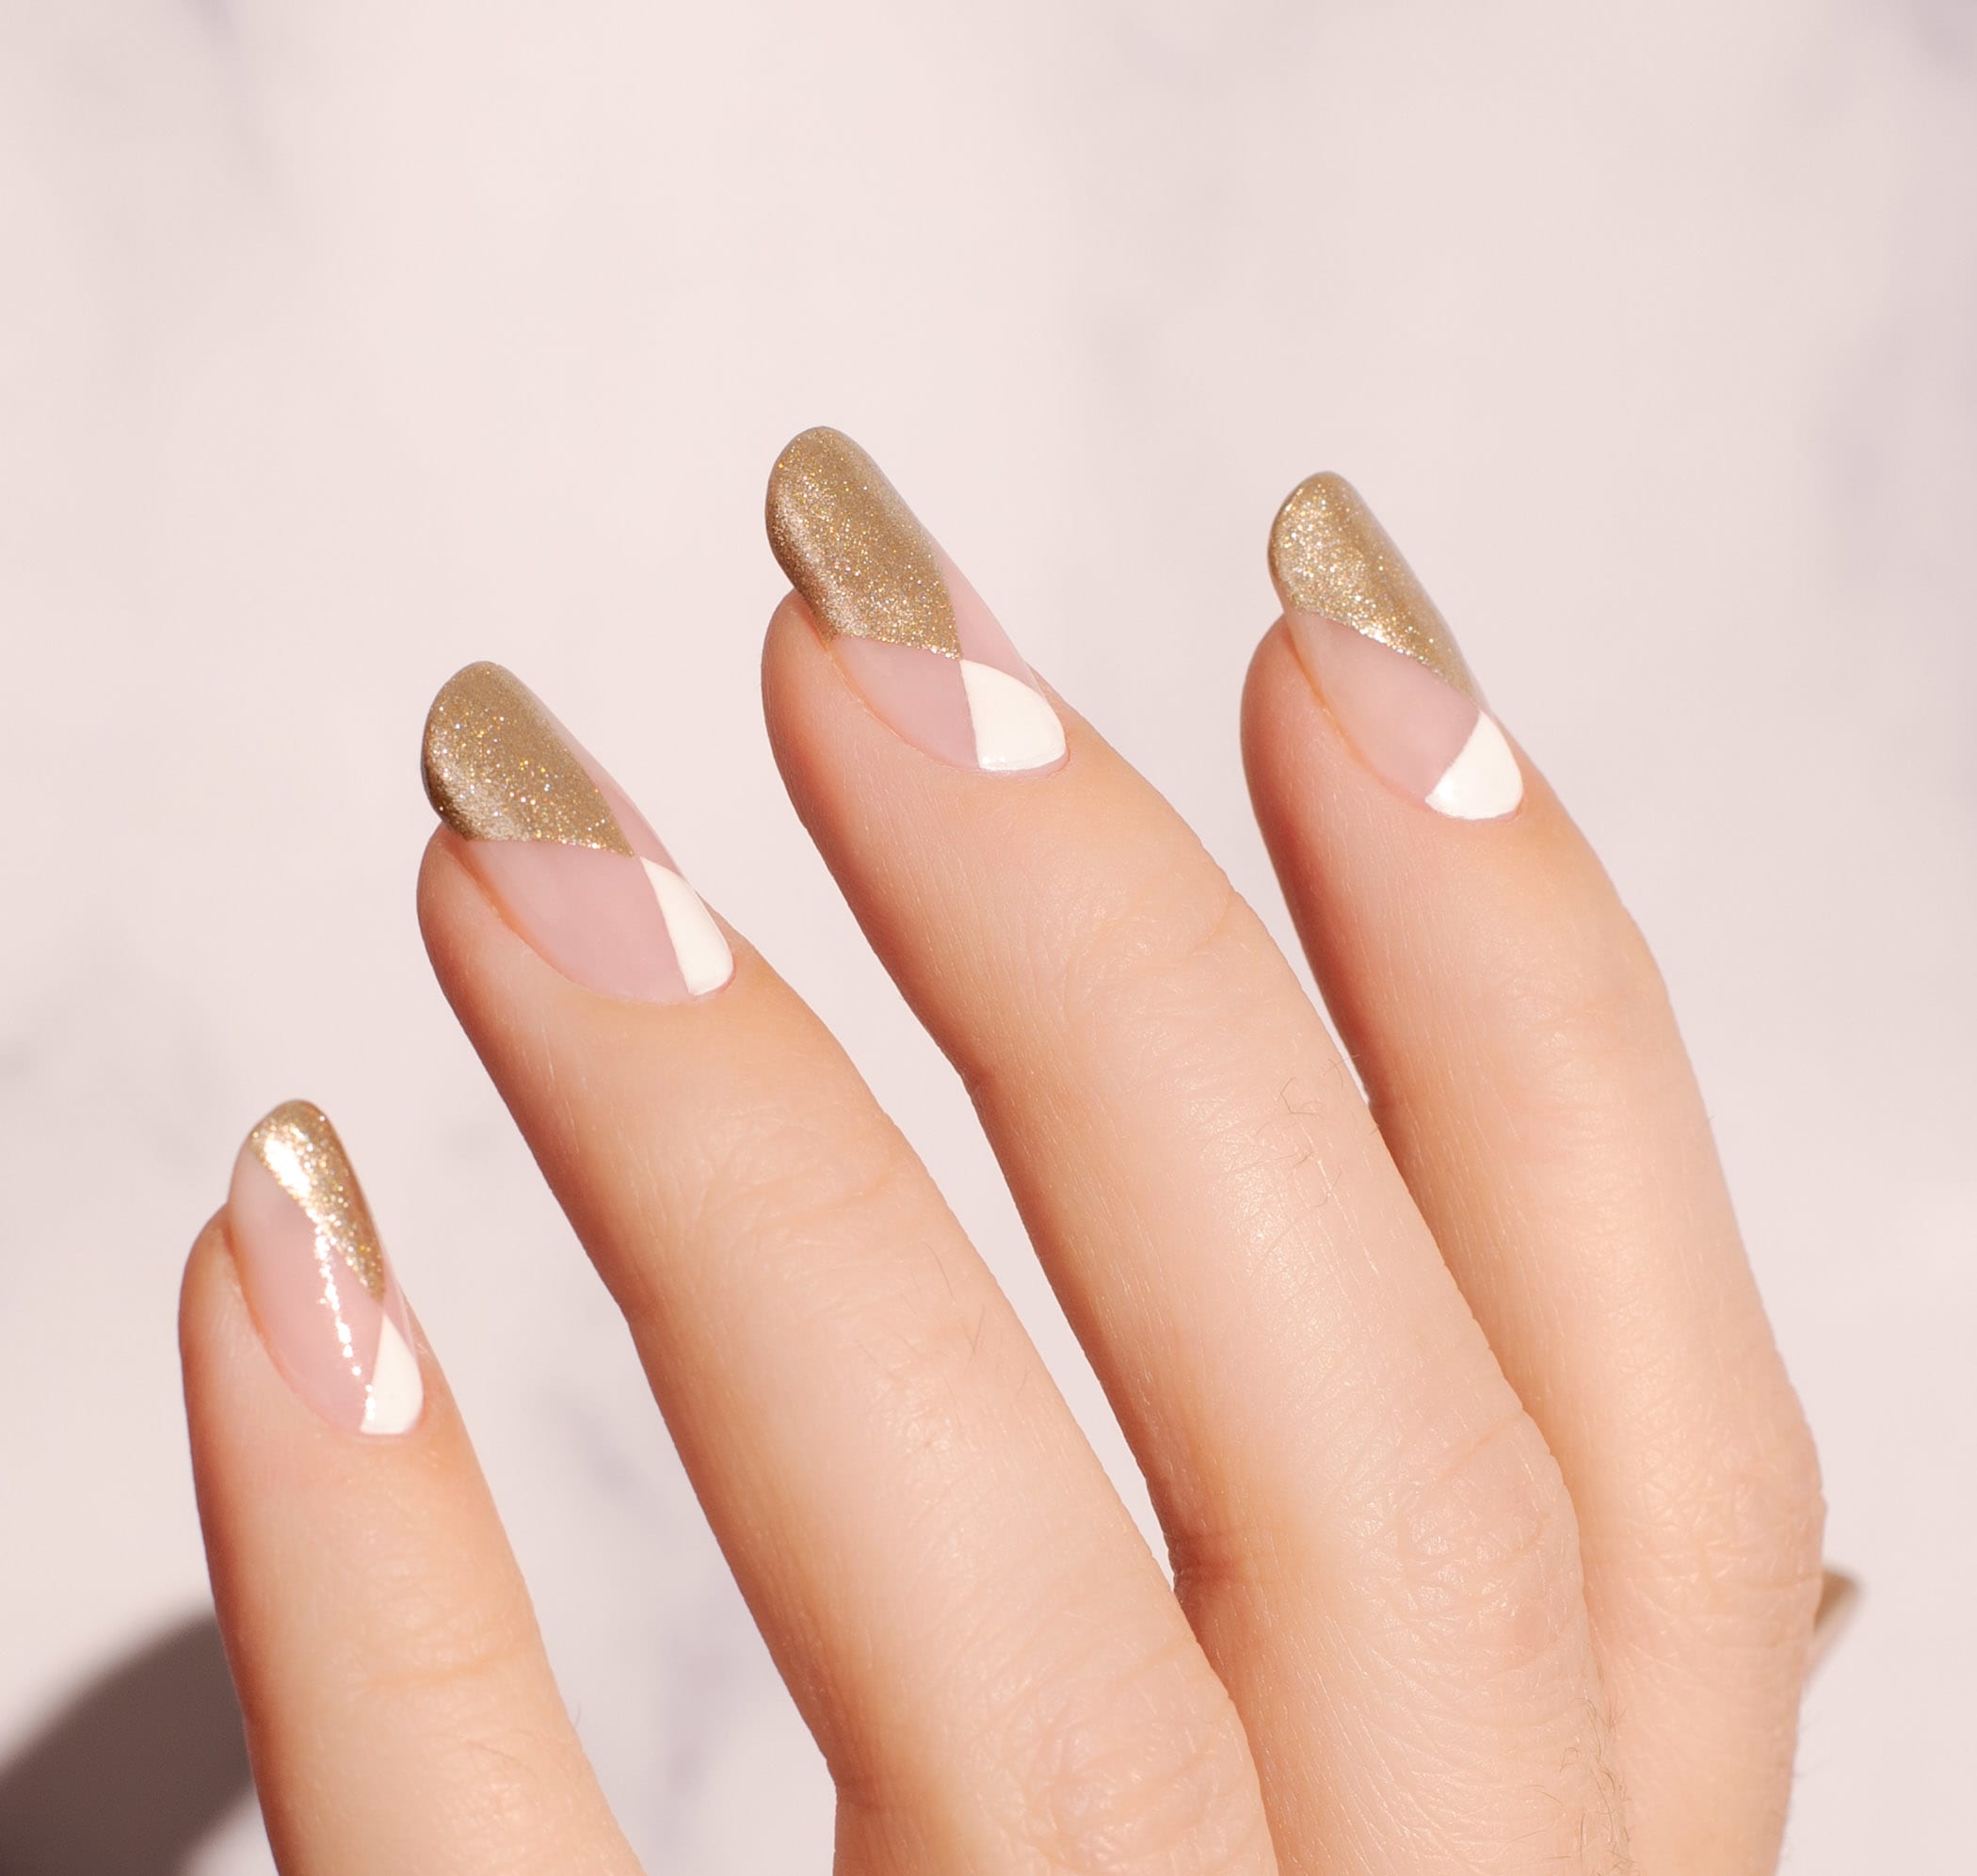 20+ Exquisite White And Gold Nails Designs - The Glossychic